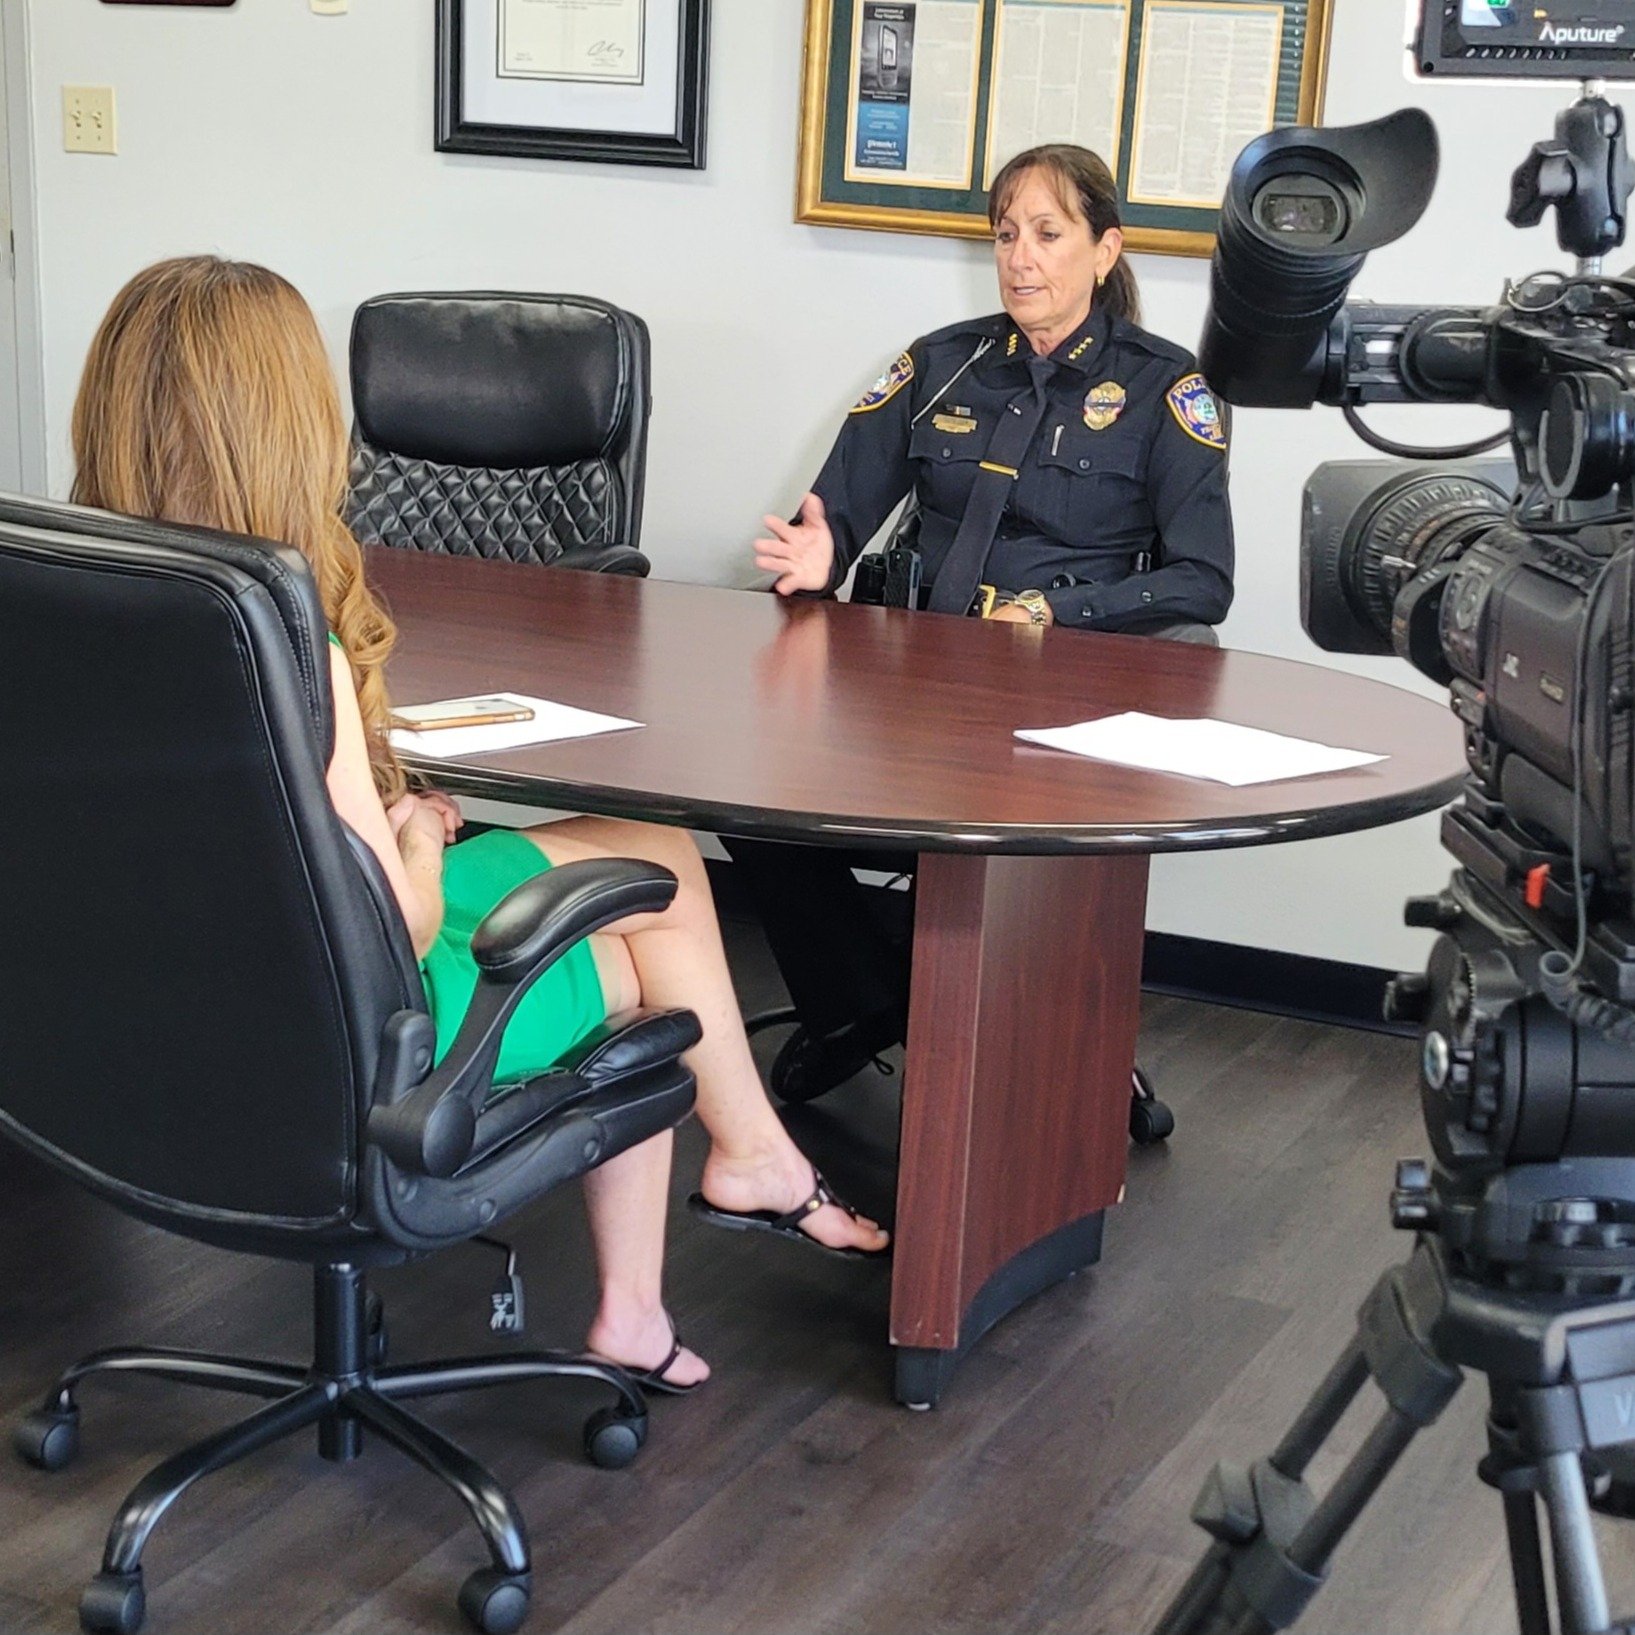 The Bradenton Police Department is fighting back against scammers who are preying on our elderly citizens - depriving them of their hard-earned money. Thank you to 8 On Your Side's Shannon Behnken for talking with us about our newly formed Elder Frau